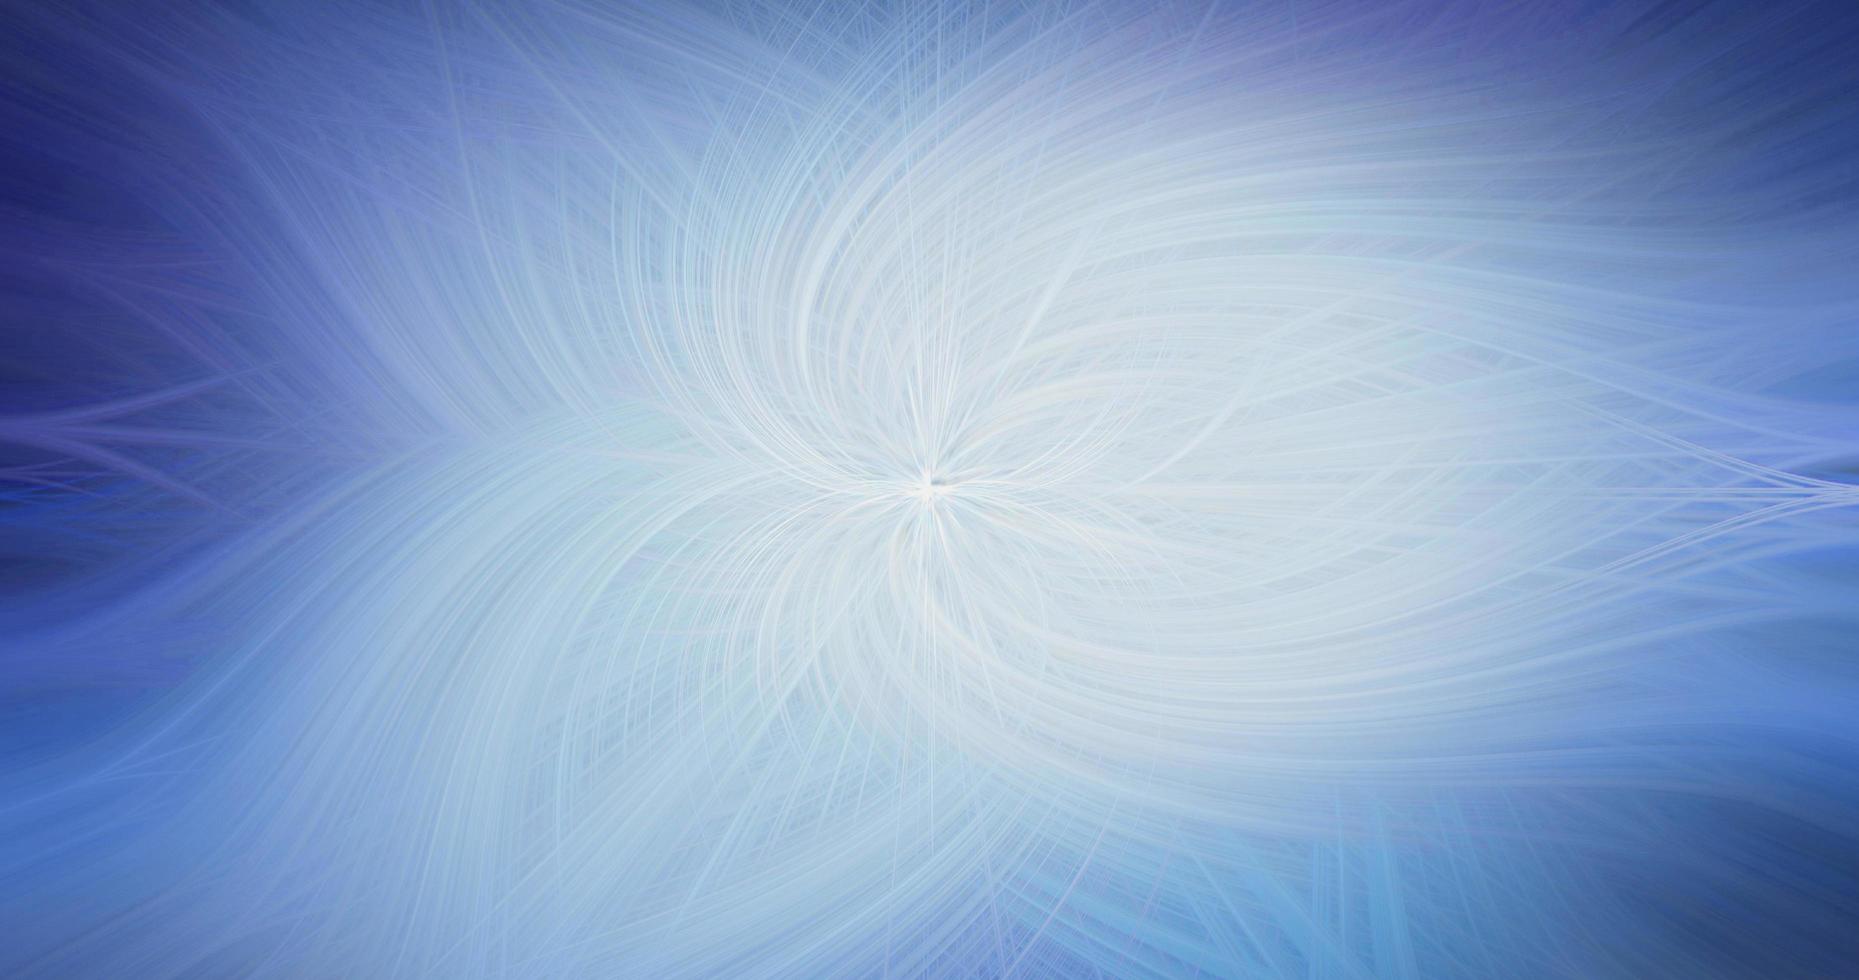 abstract twisted light blue fiber wave texture falling swirls effect with curved trail shining pattern on light. photo